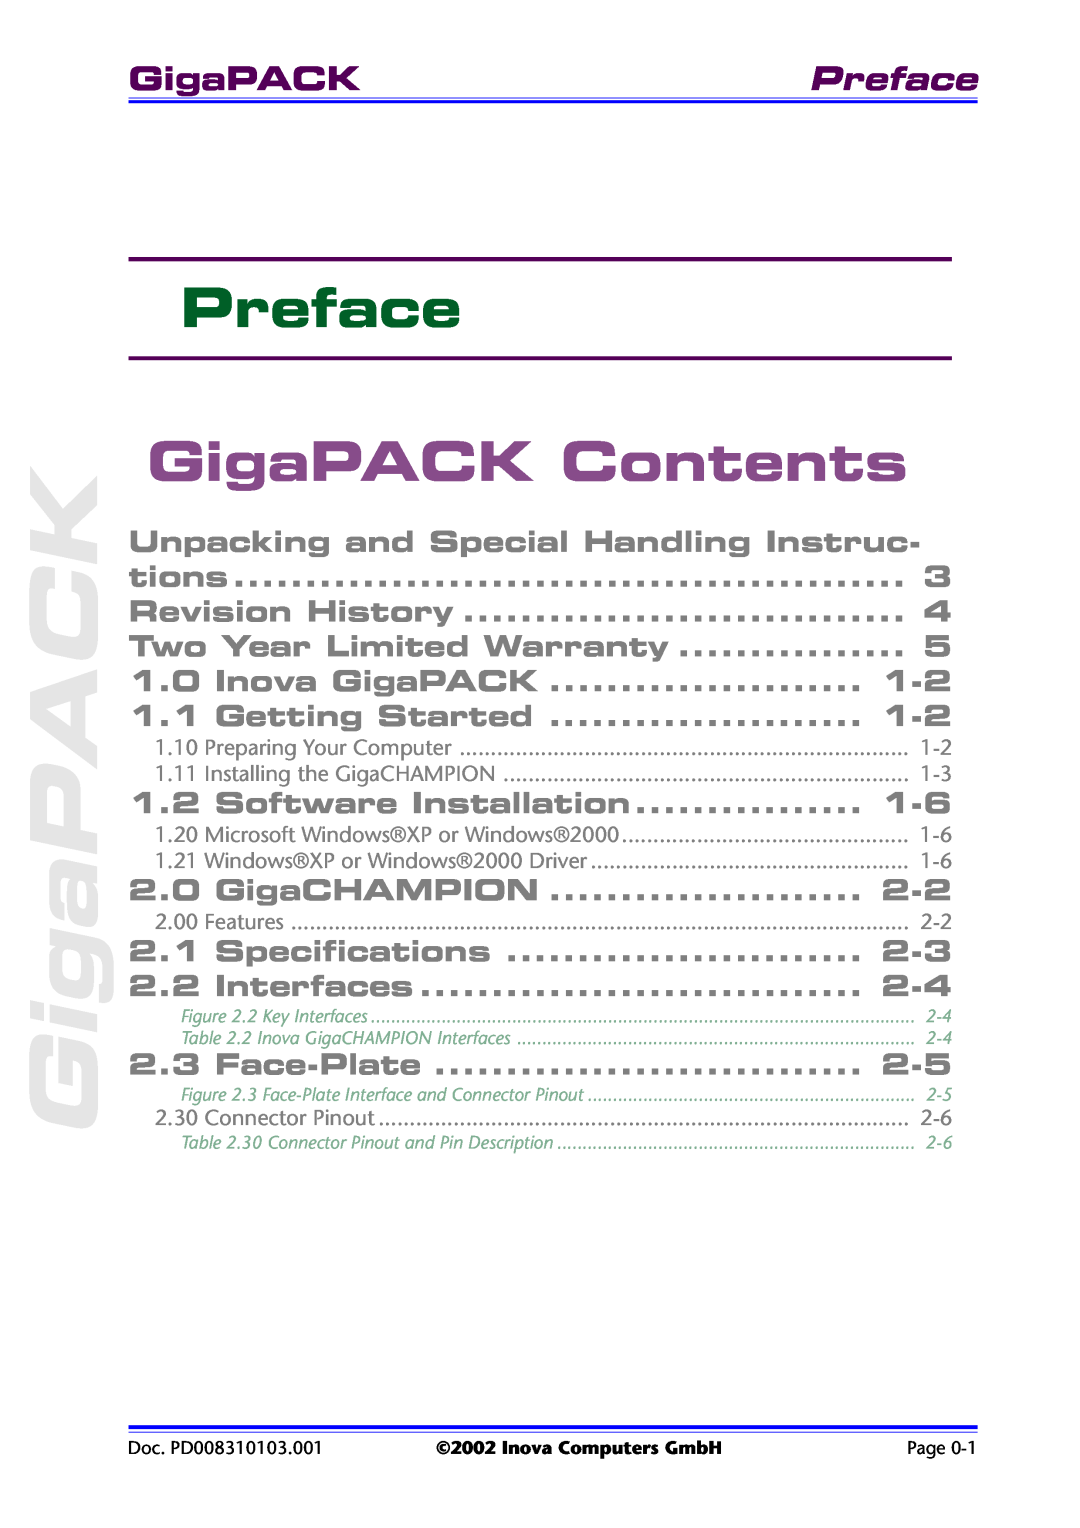 Inova PD008310103.001 AB user manual GigaPACK Contents, GigaPACKPreface 